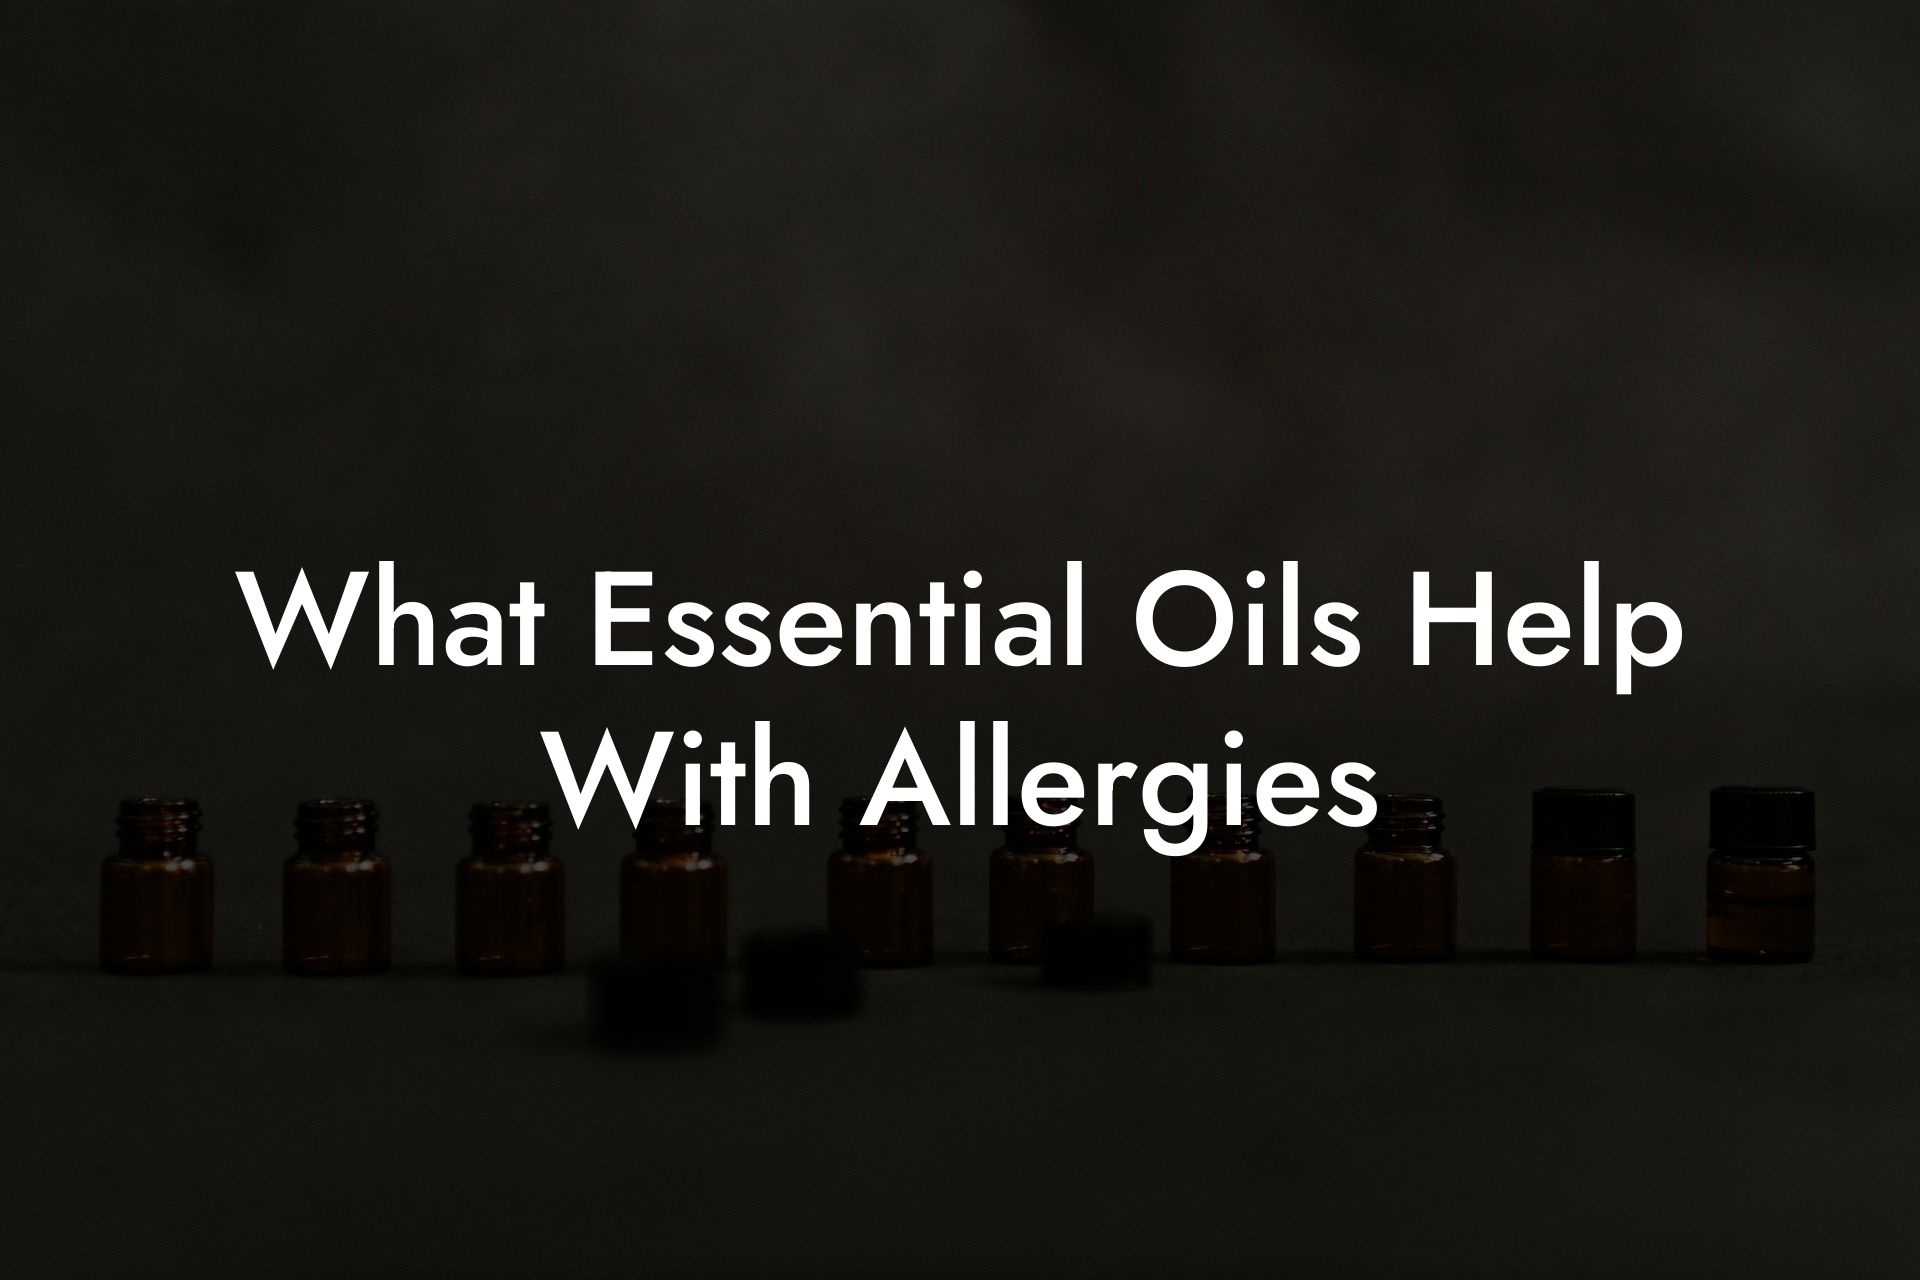 What Essential Oils Help With Allergies